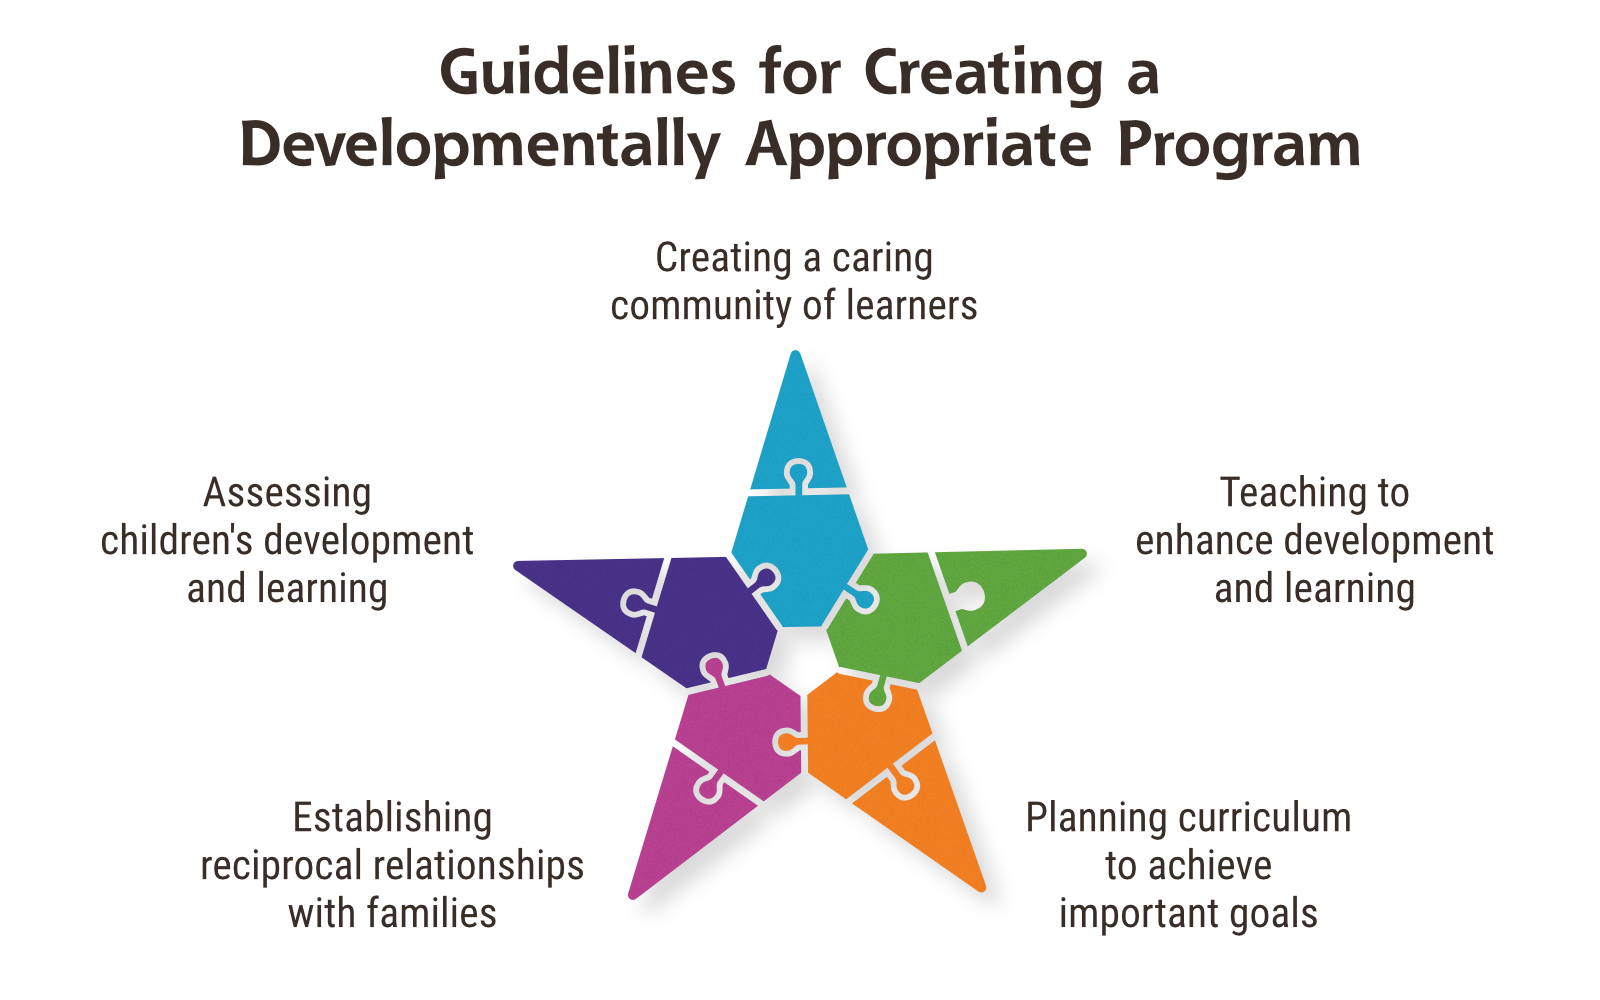 Guidelines for Creating a Developmentally Appropriate Program